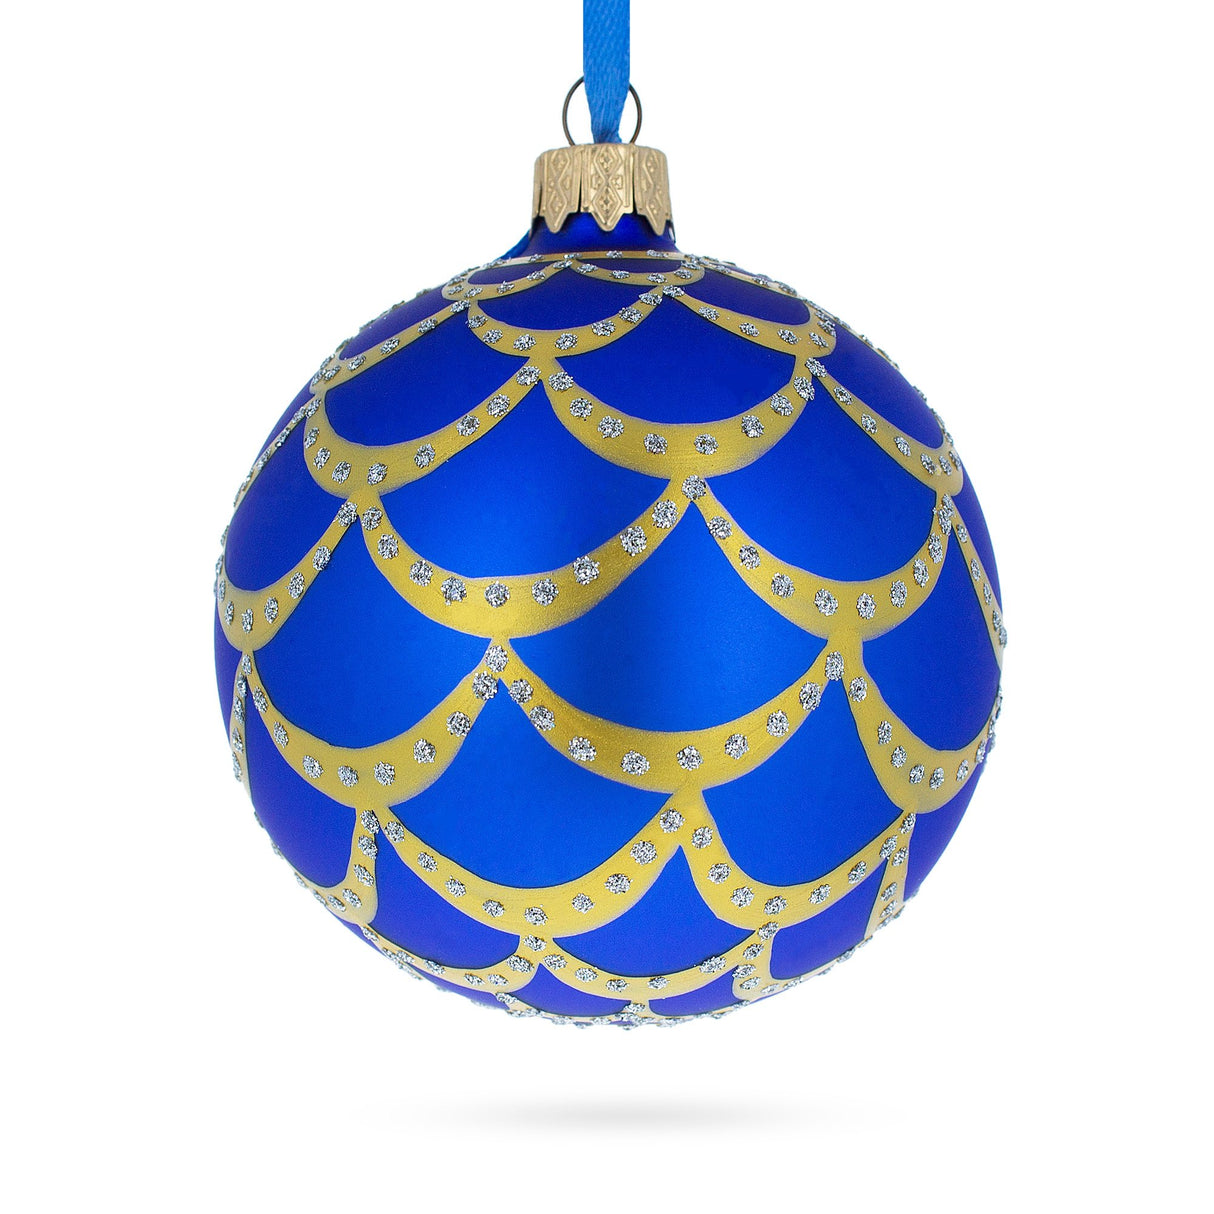 Elegant 1900 Kelch Pine Cone Royal Egg - Blown Glass Christmas Ornament 3.25 Inches in Blue color, Round shape